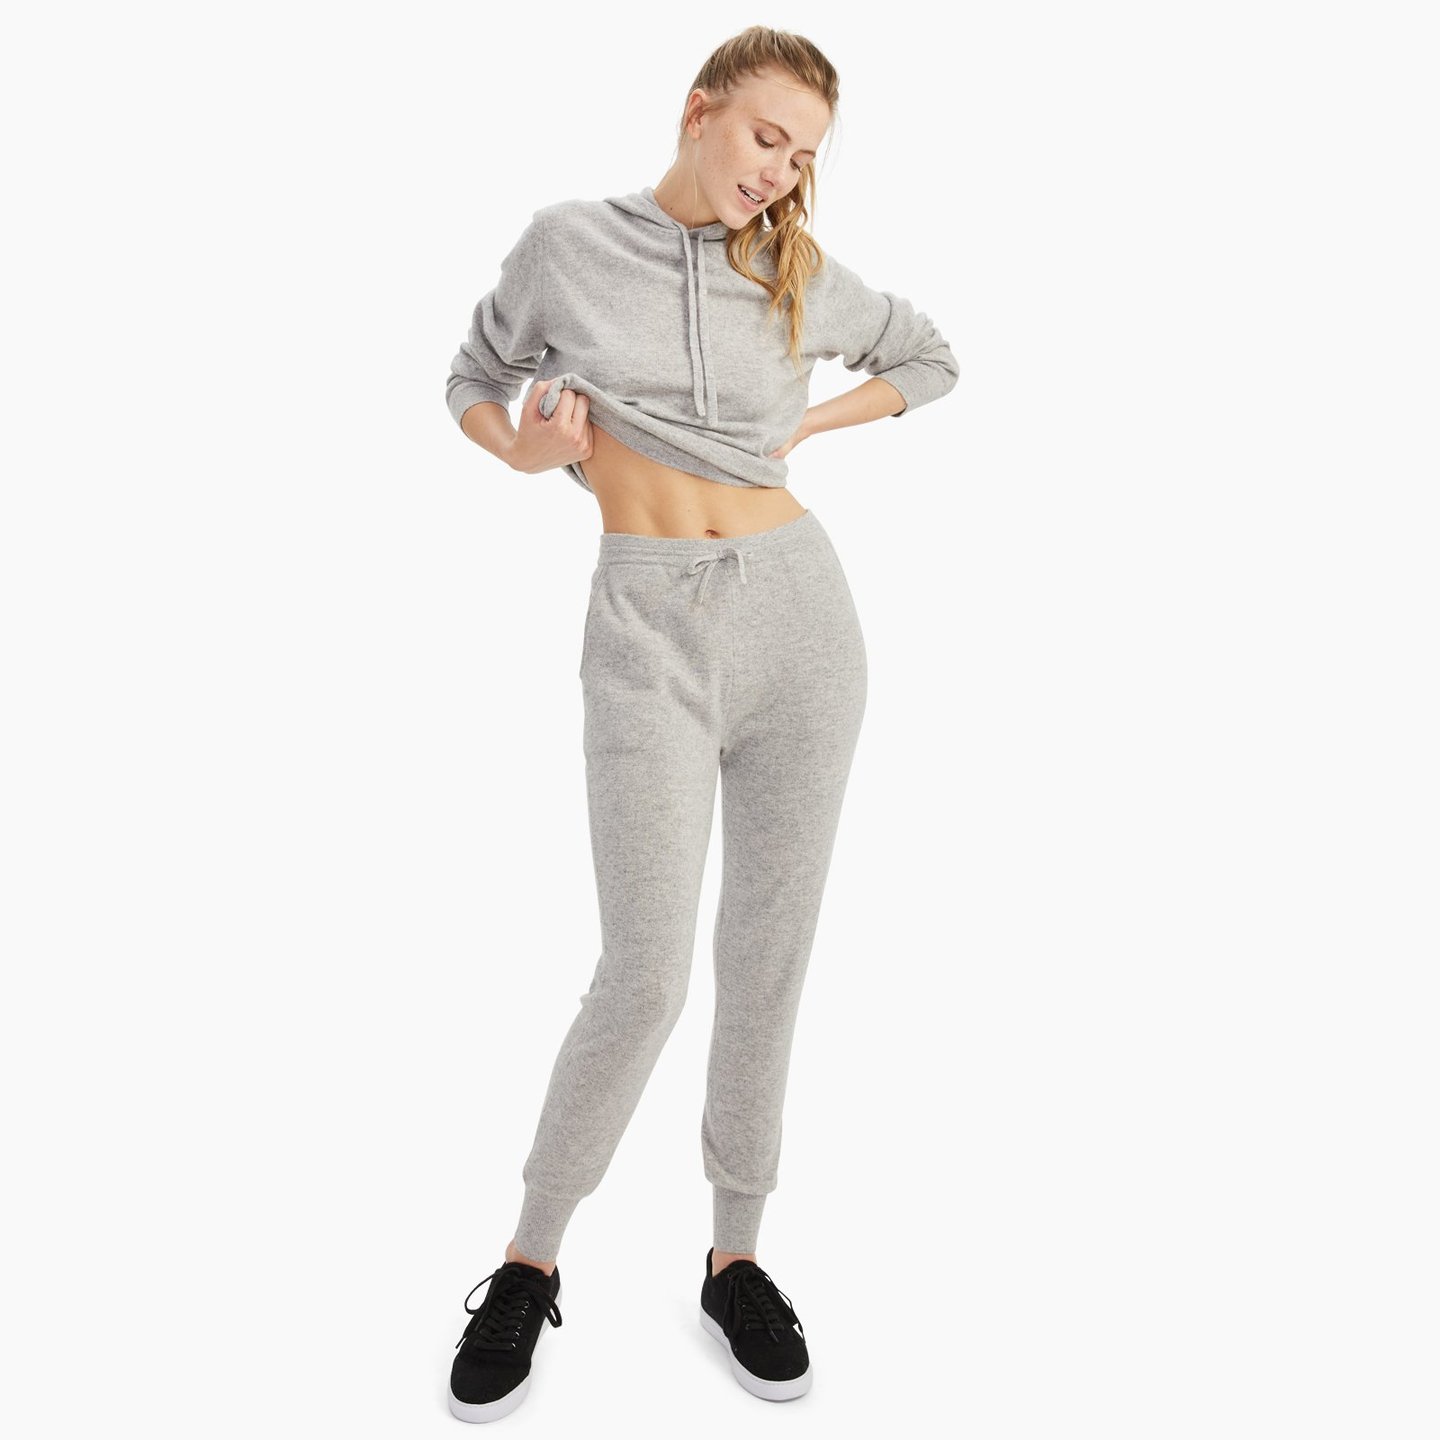 NWEB000151_The_Essential_Cashmere_Sweatpants_Cement_003_1440x.jpg